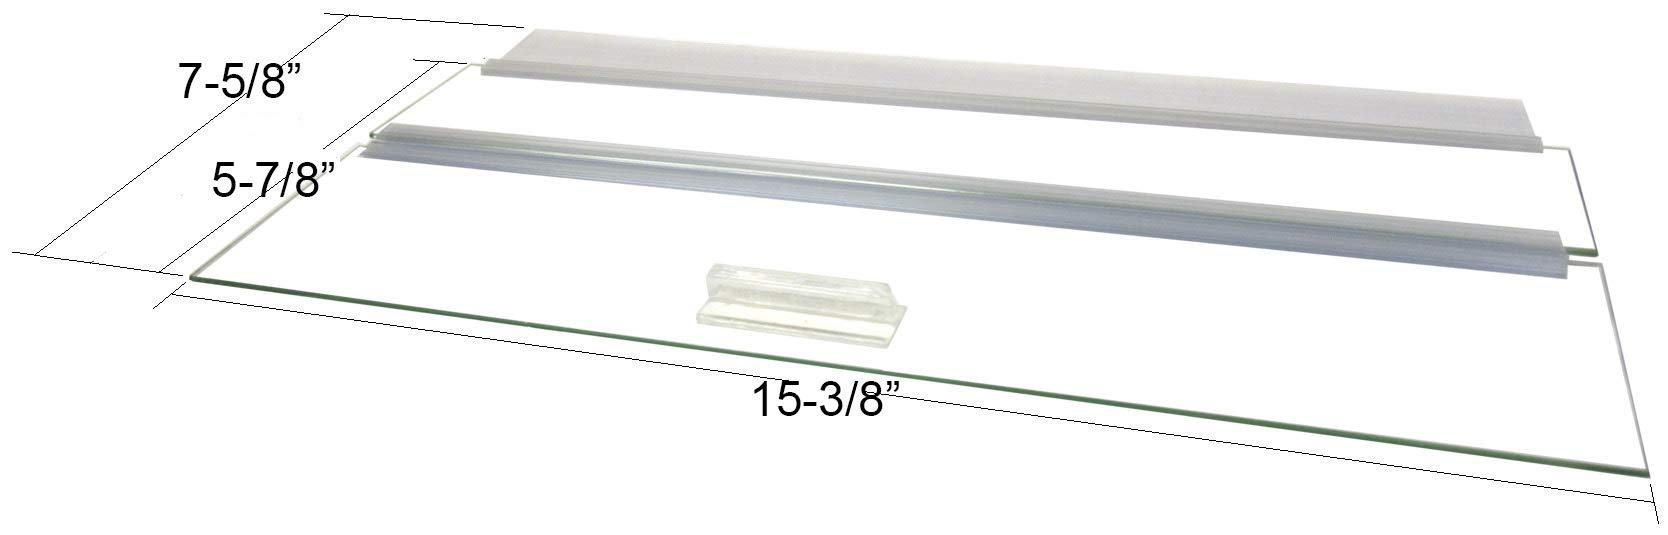 Aquarium Glass Canopies for Aquariums with & Without Center Braces, 5 to 360 Gallon Aquariums. Carefully Select Size and Match Exact Canopy Measurements. (Tank Without Center Brace, 16 L x 8 W)